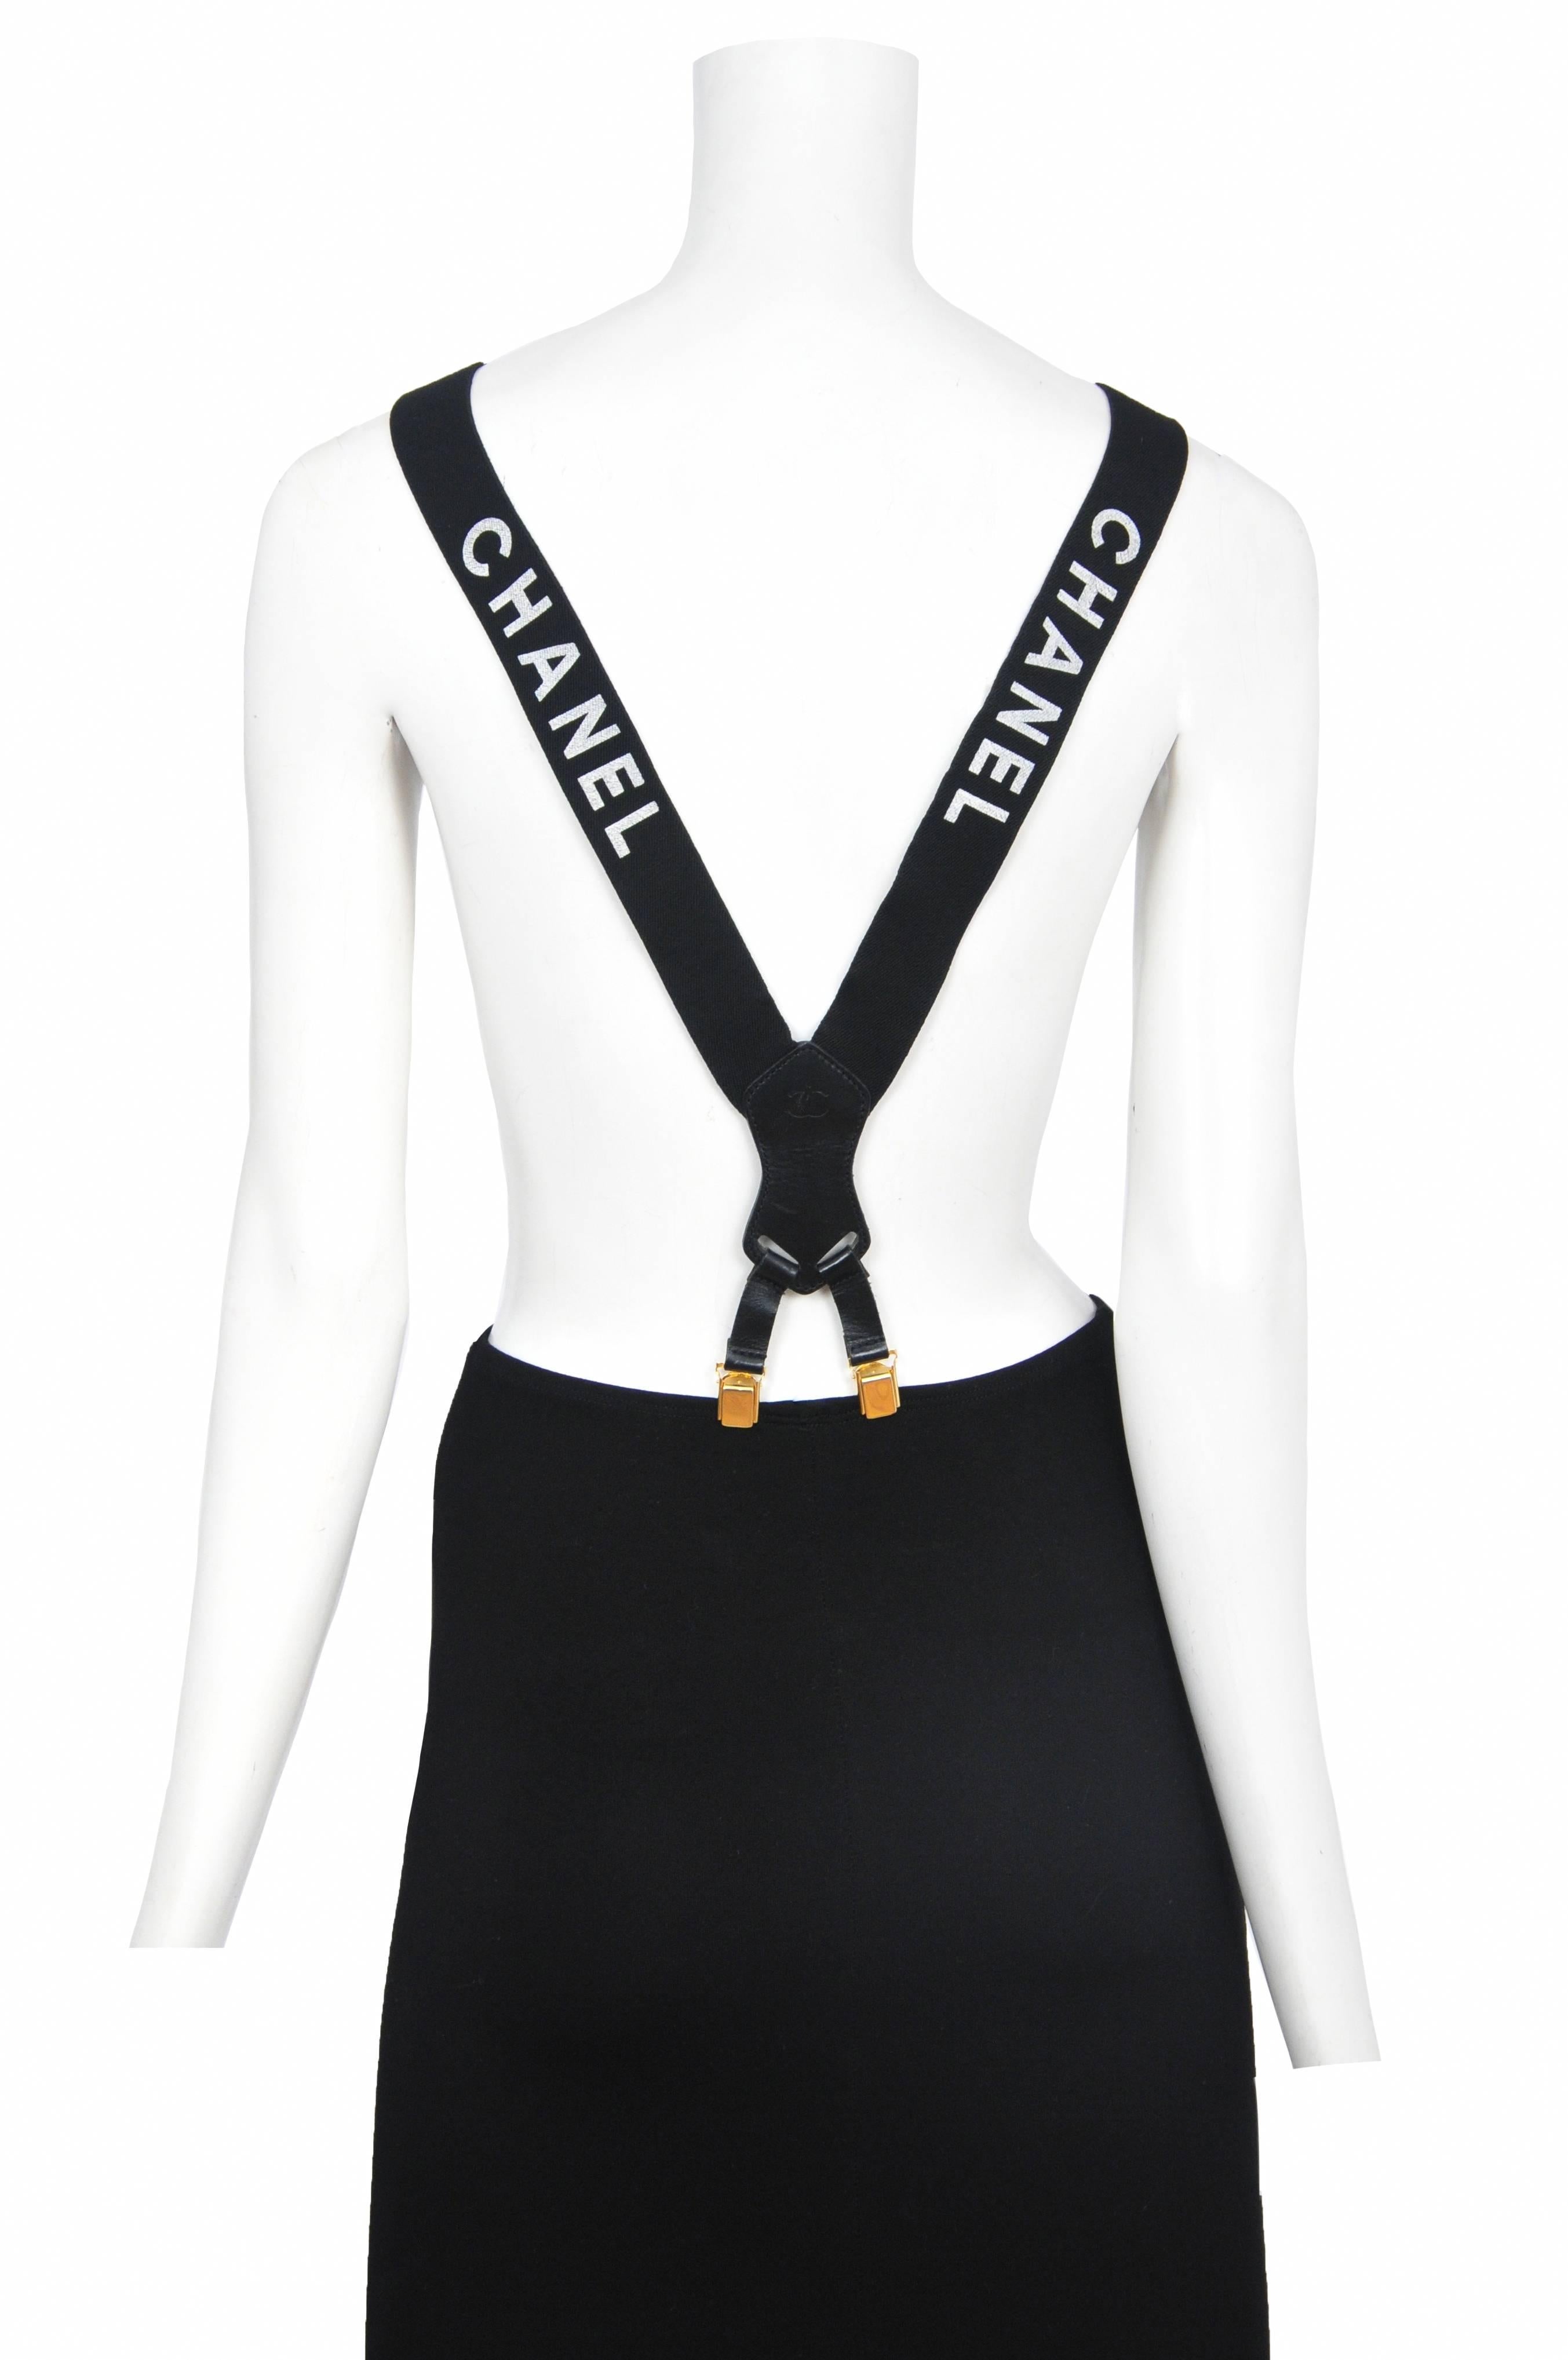 Chanel black suspenders with white Chanel logo.  